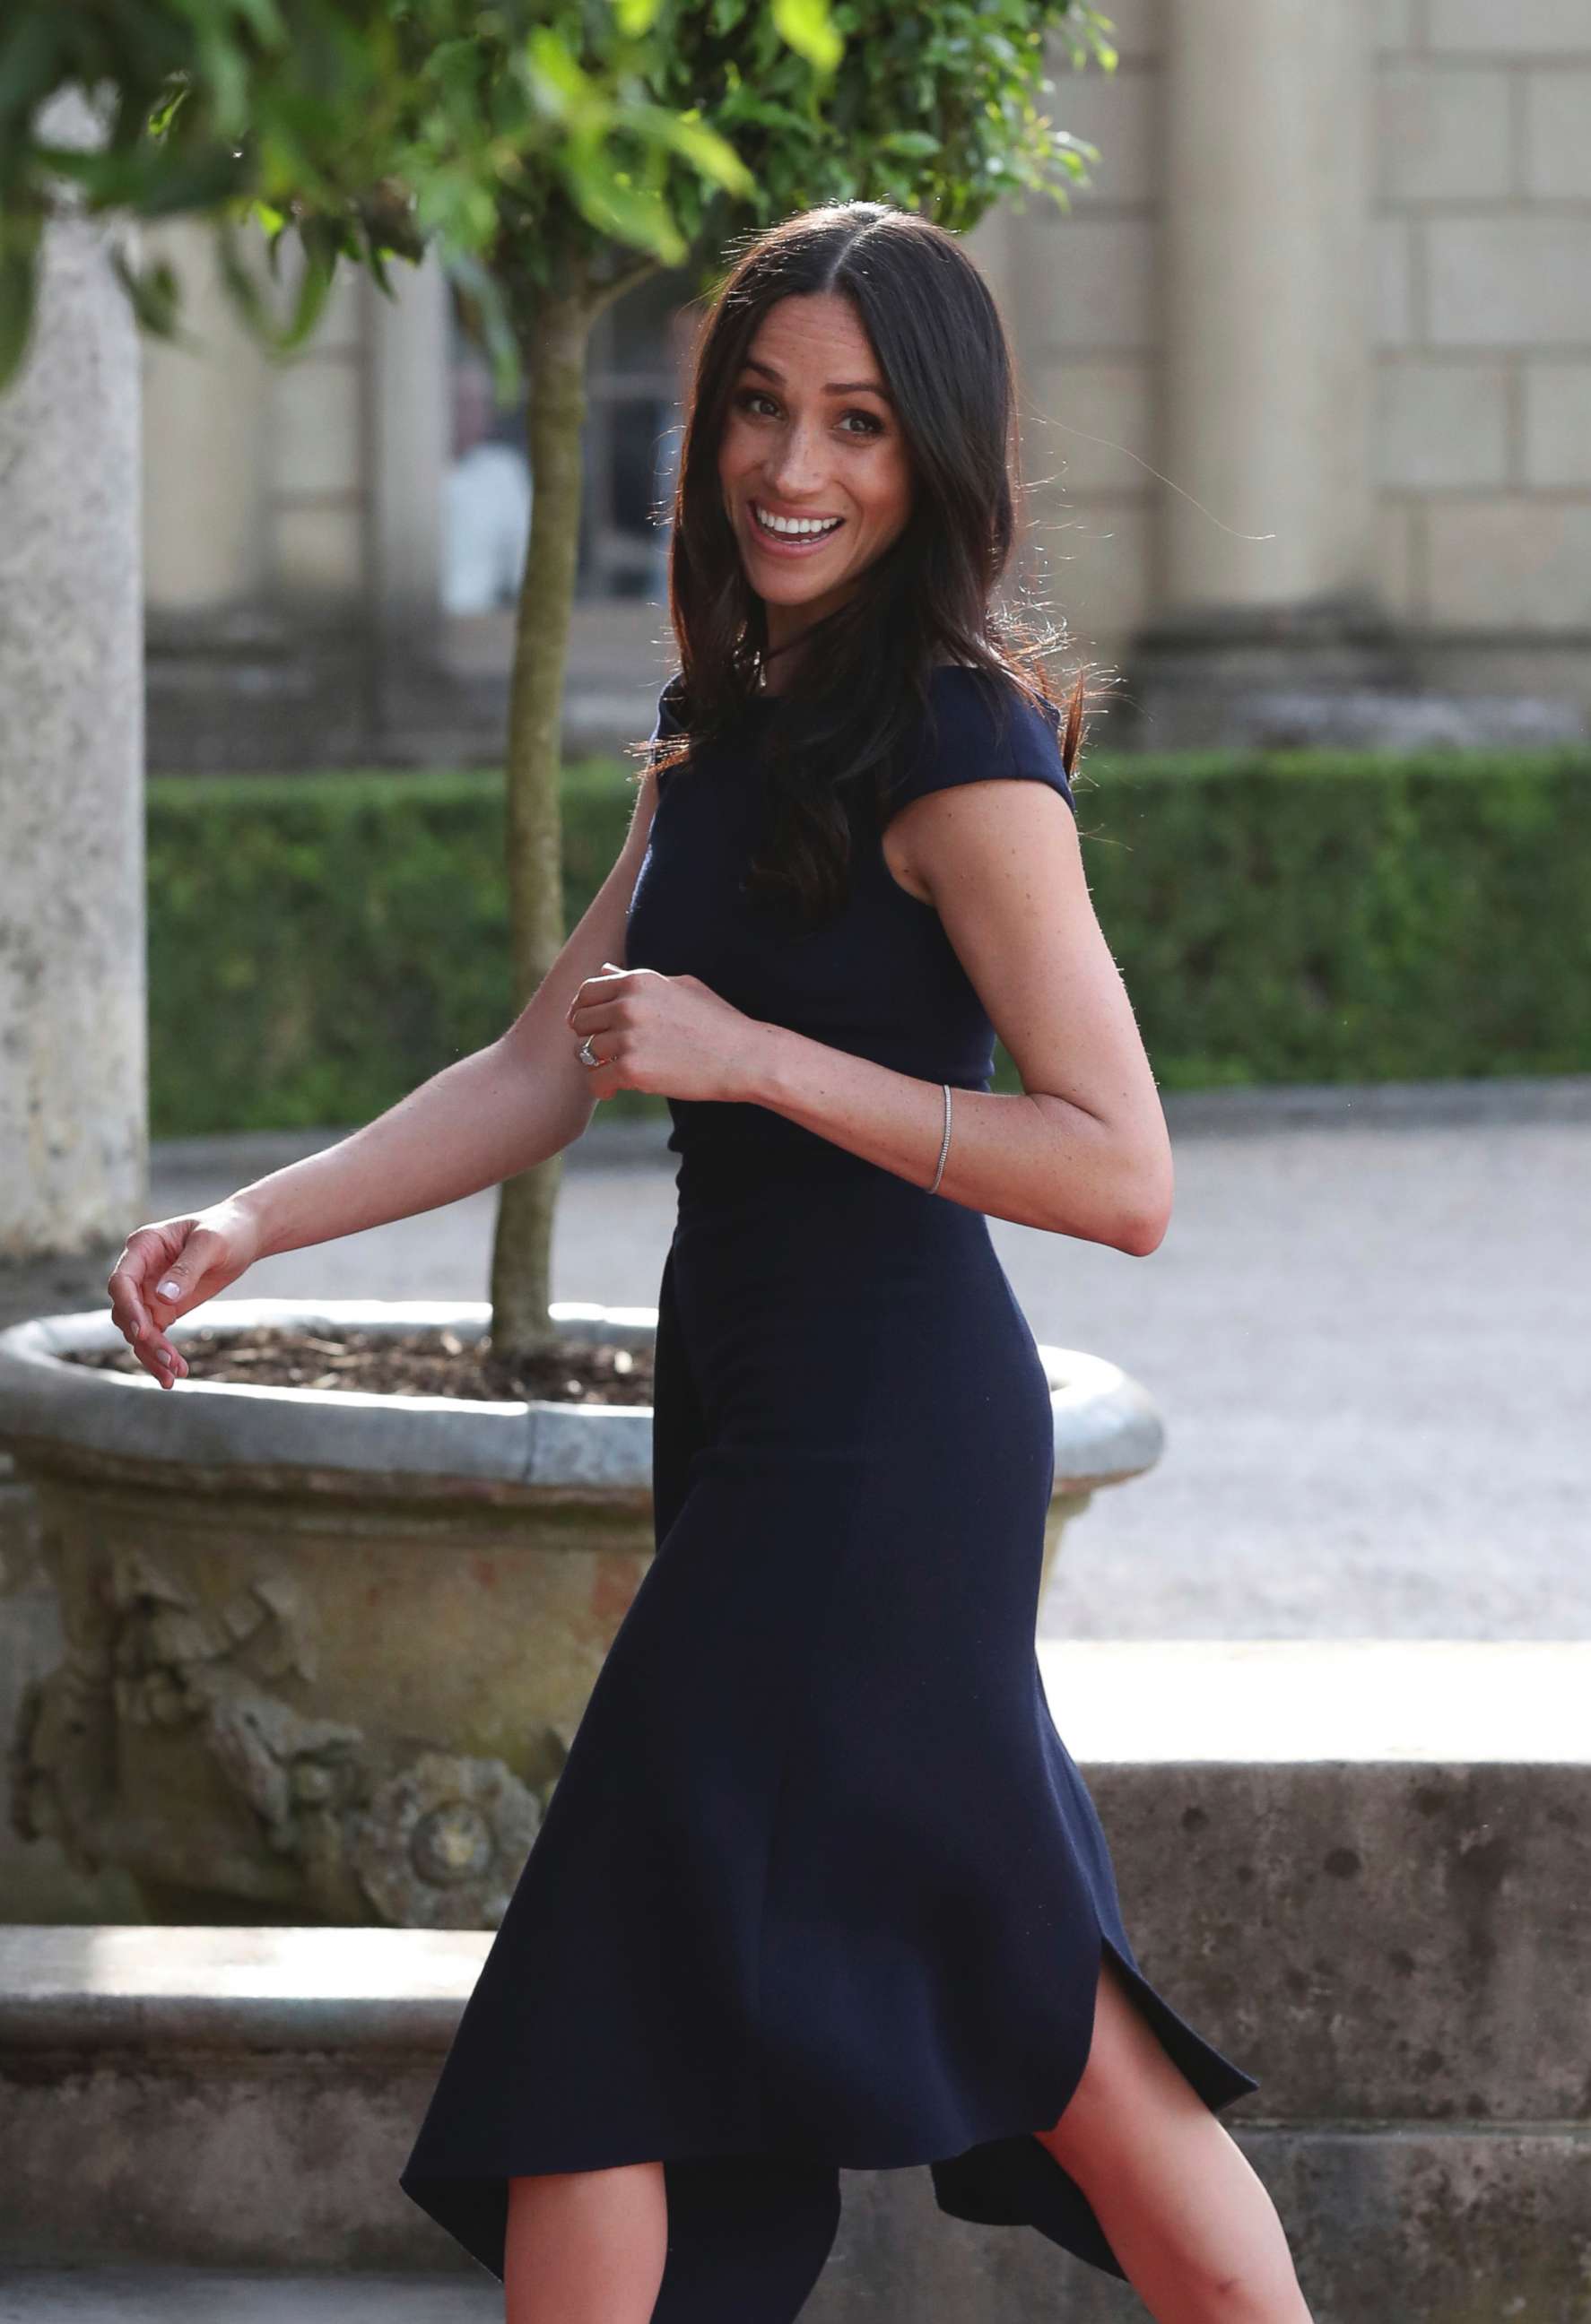 PHOTO: Meghan Markle arrives at Cliveden House Hotel, in Berkshire, England, May 18, 2018 to spend the night before her wedding to Prince Harry on Saturday.